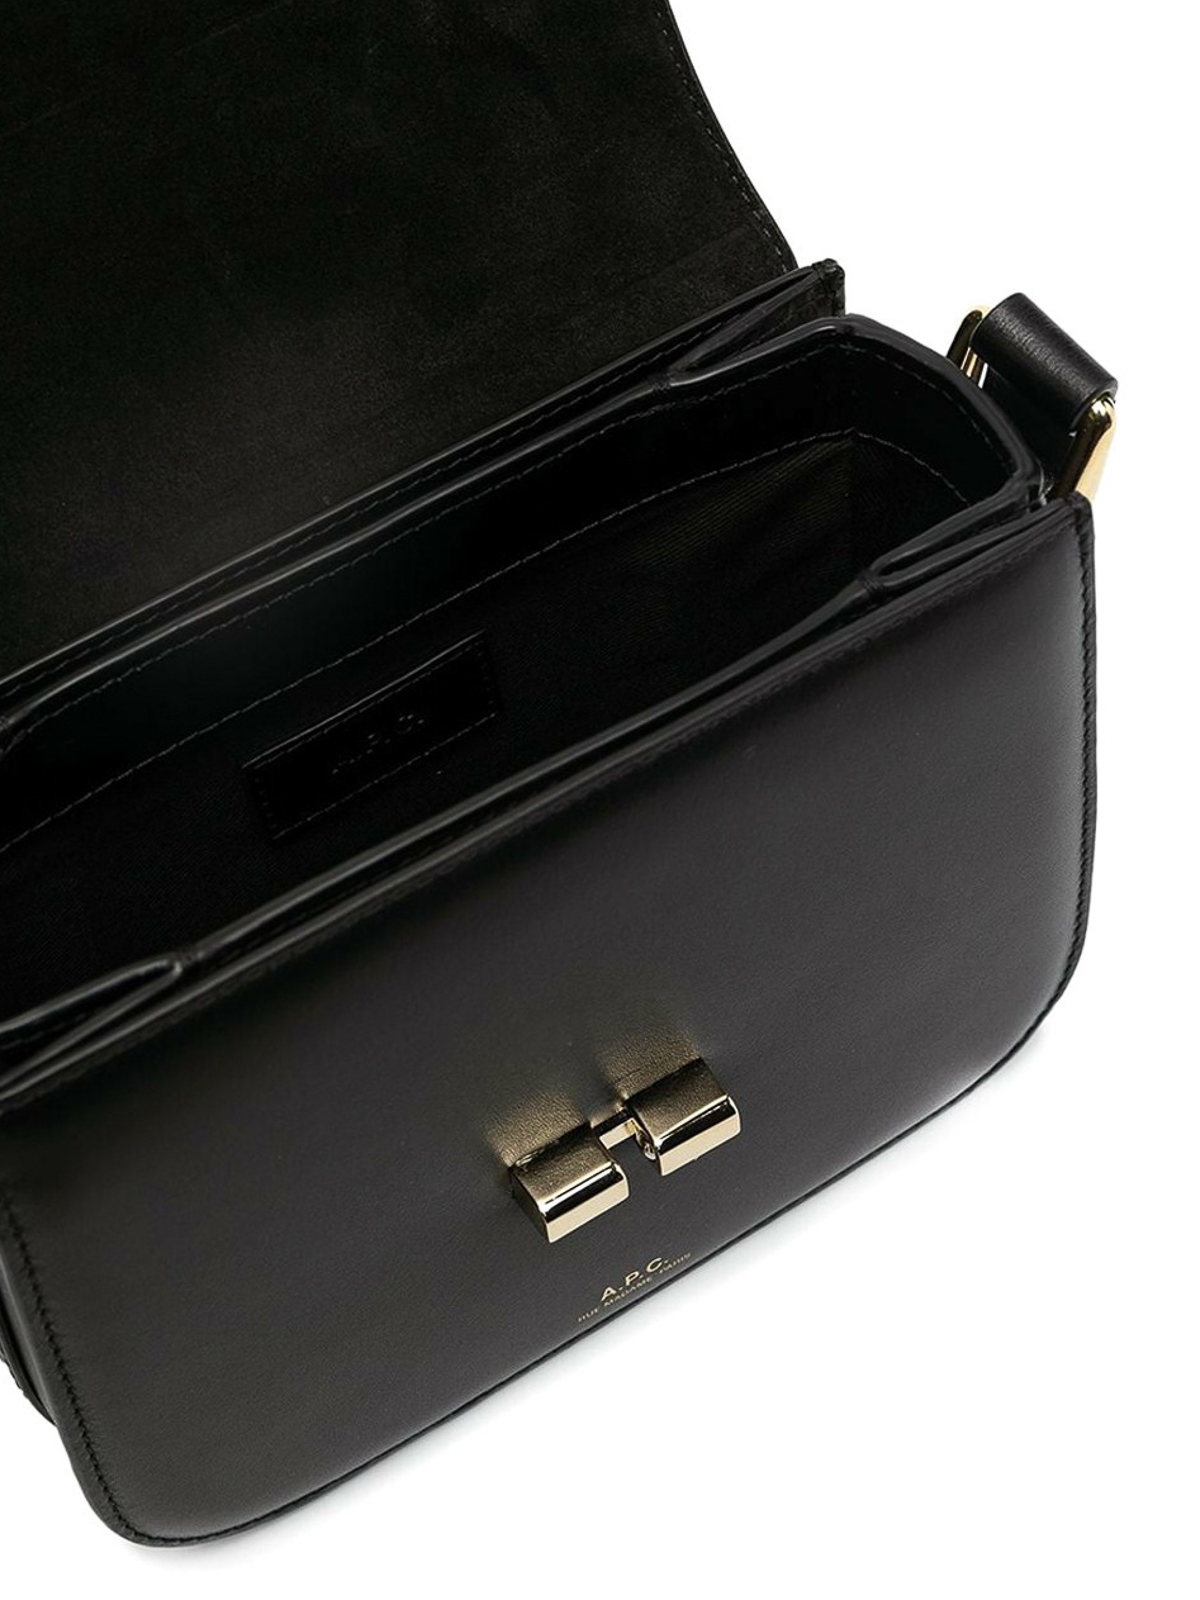 New A.p.c. APC grace small bag black Smooth Black Leather- JUST IN